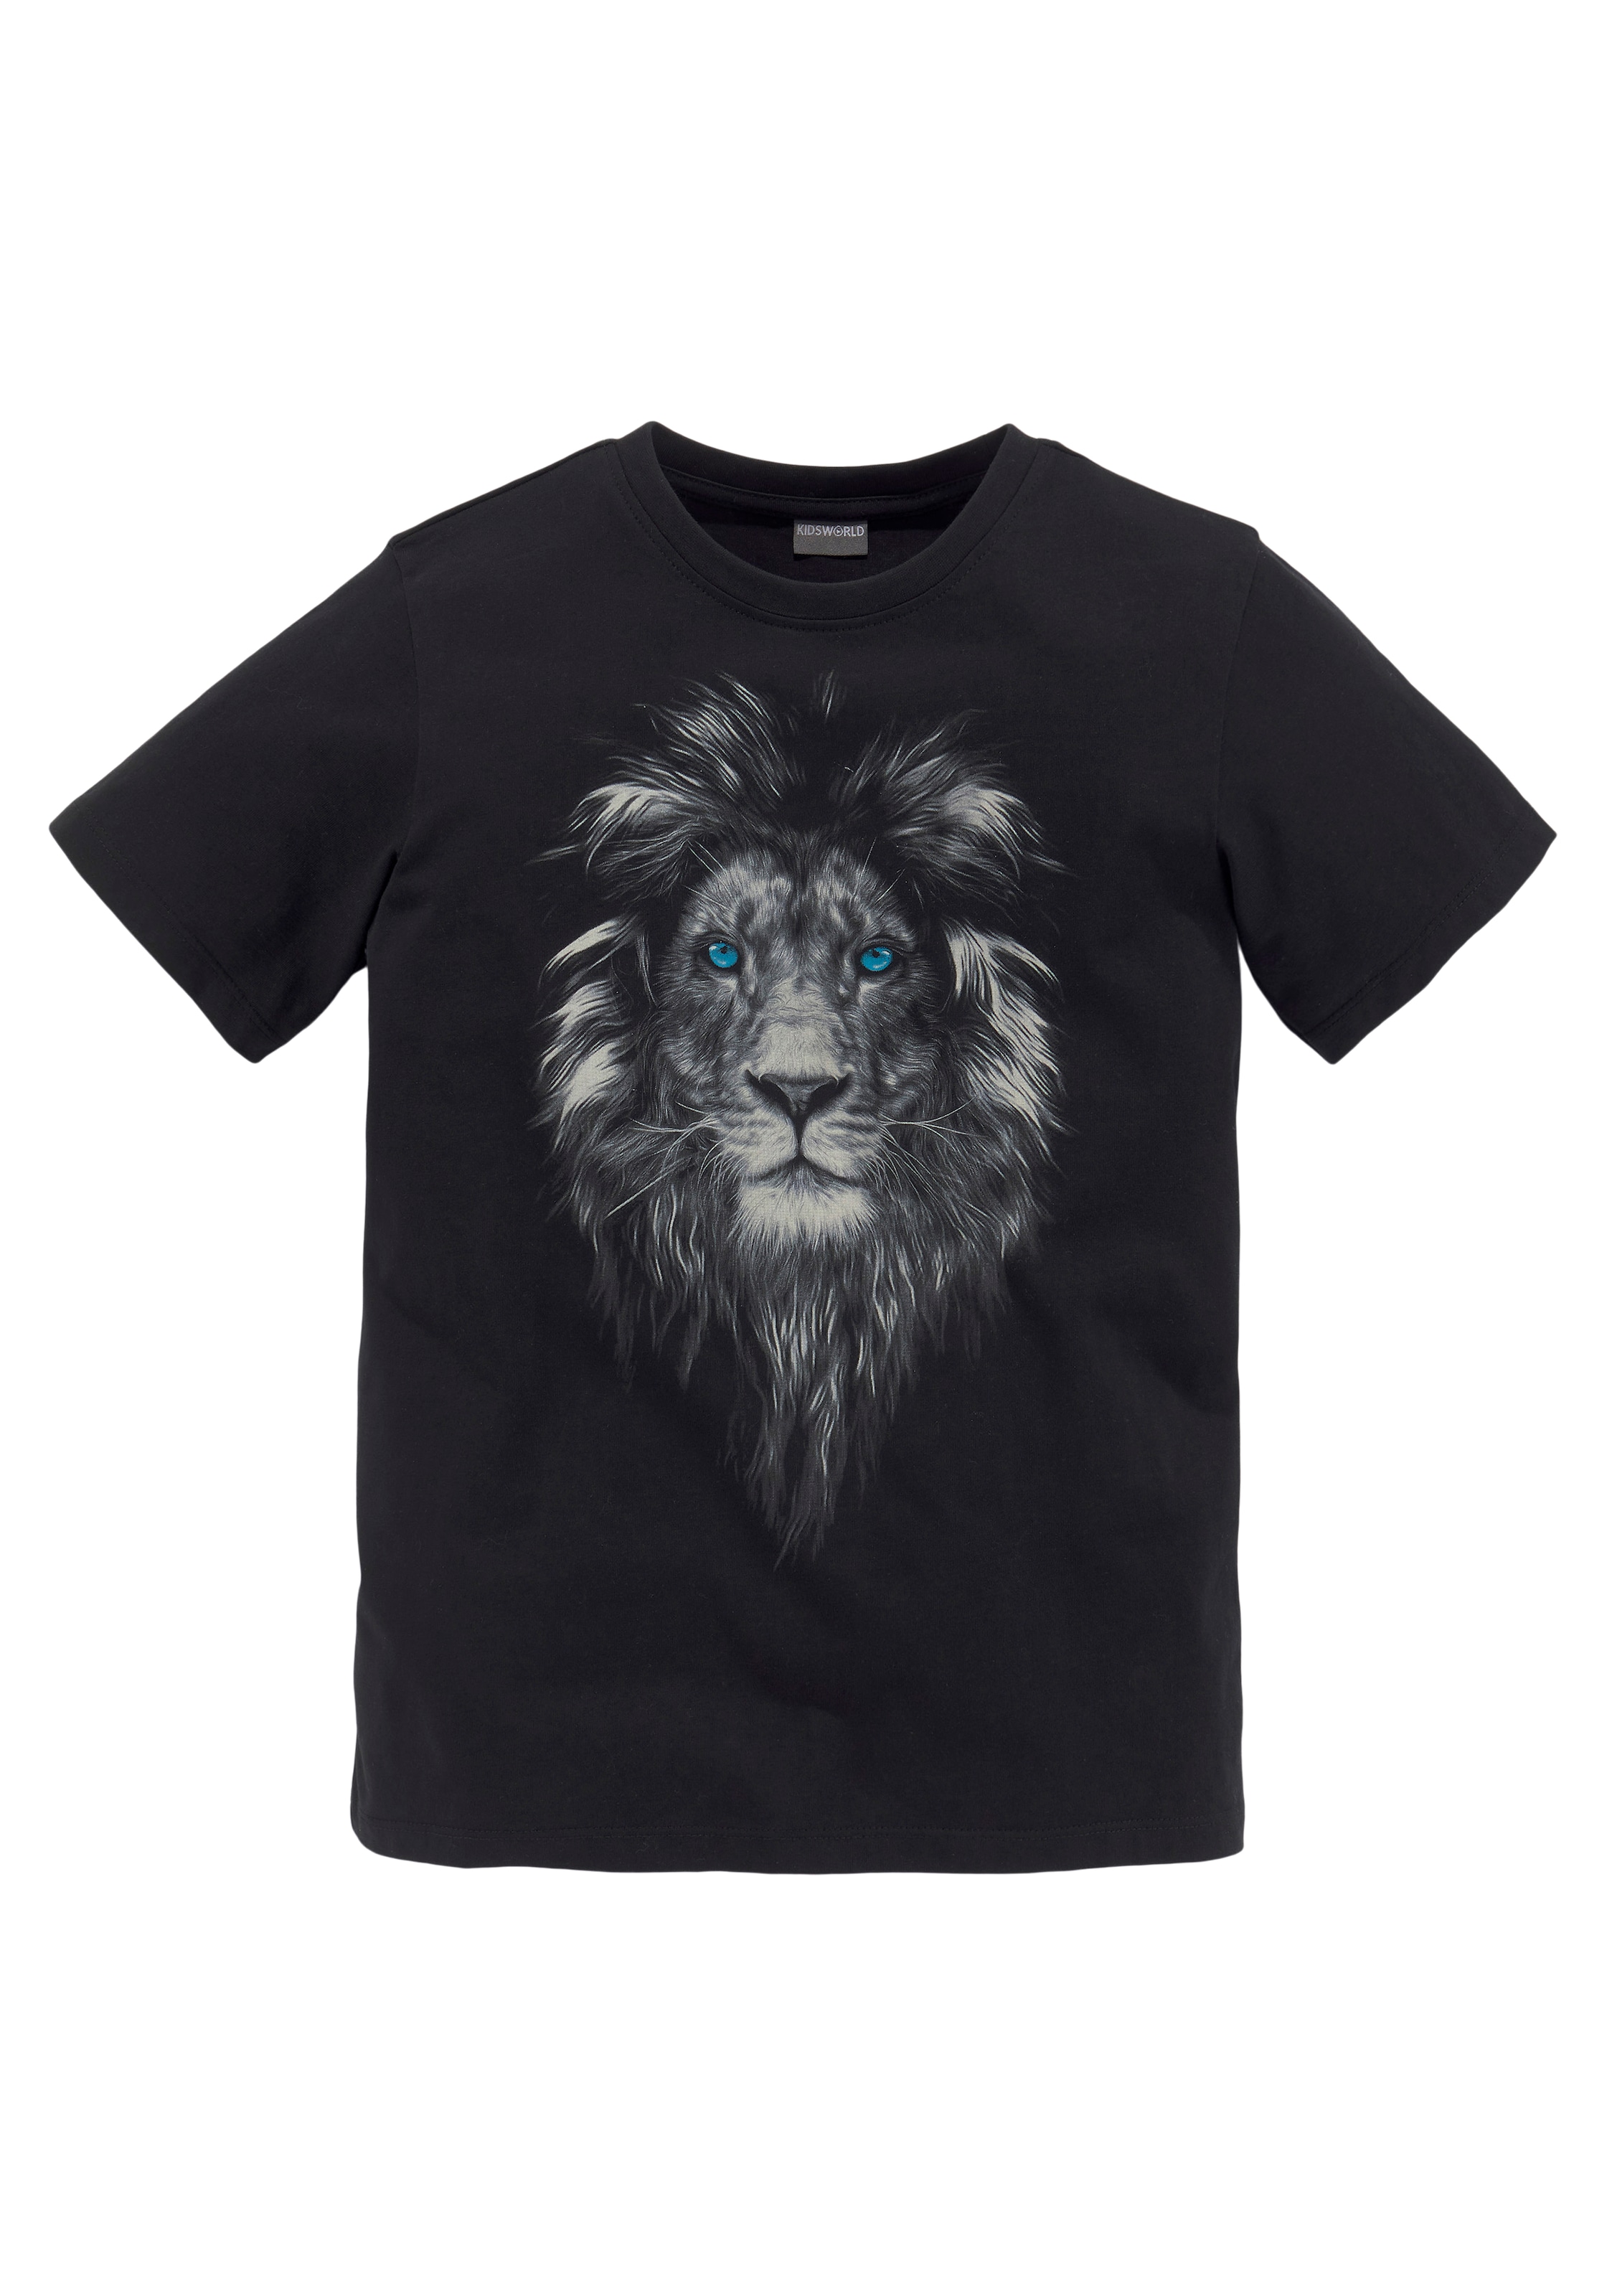 WITH bei »LION EYES« KIDSWORLD BLUE T-Shirt